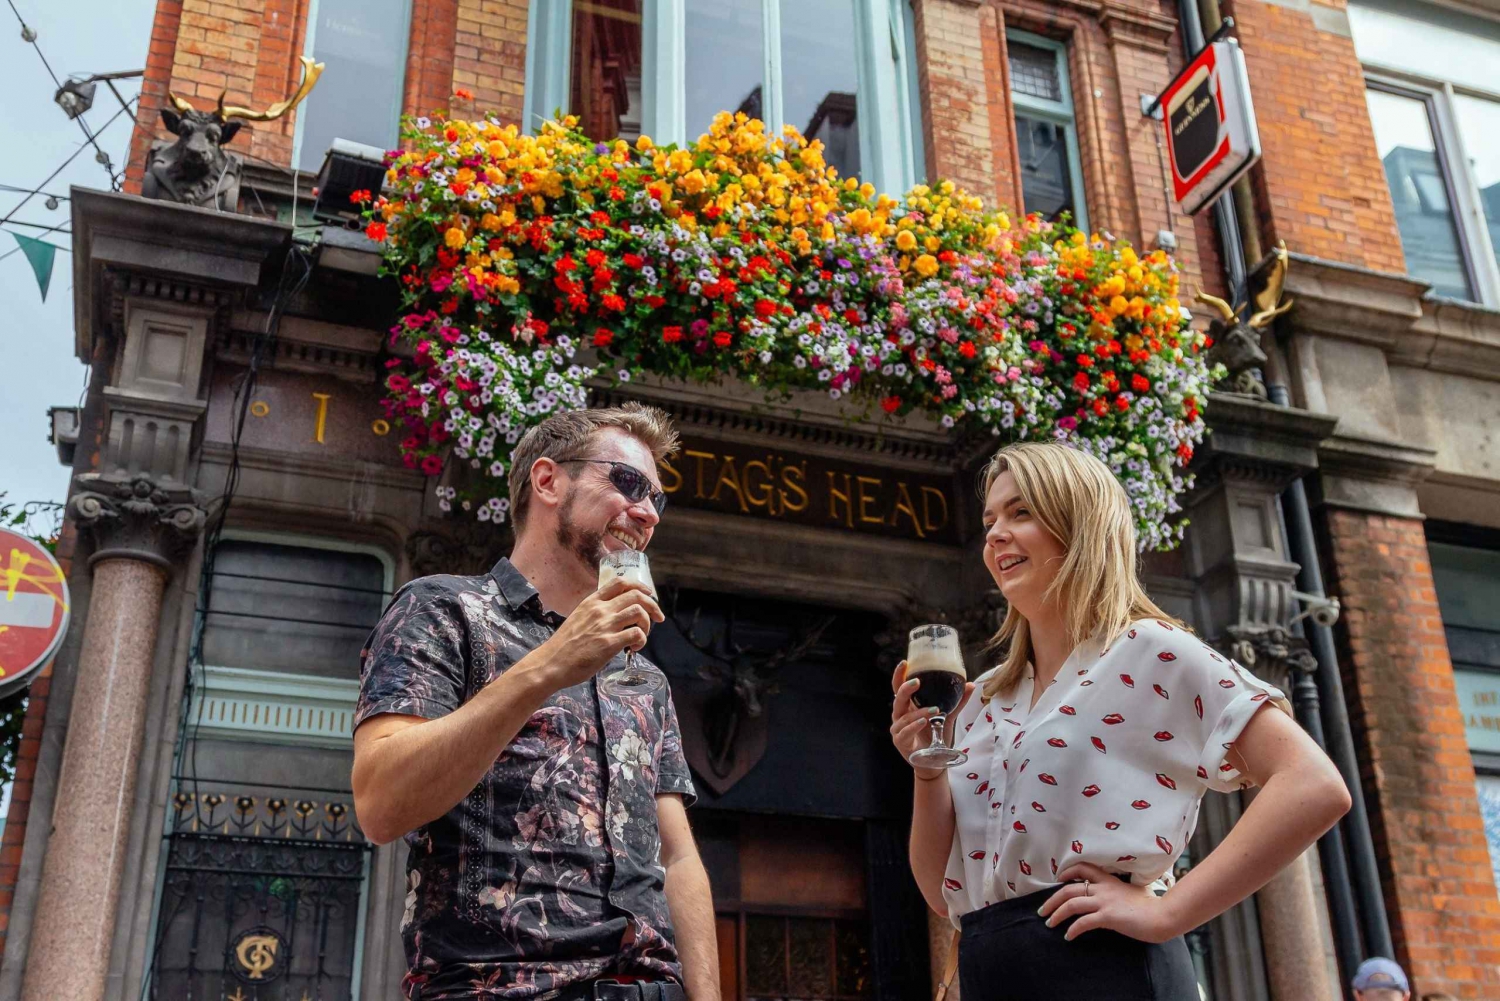 The 10 Tastings of Dublin Private Food Tour